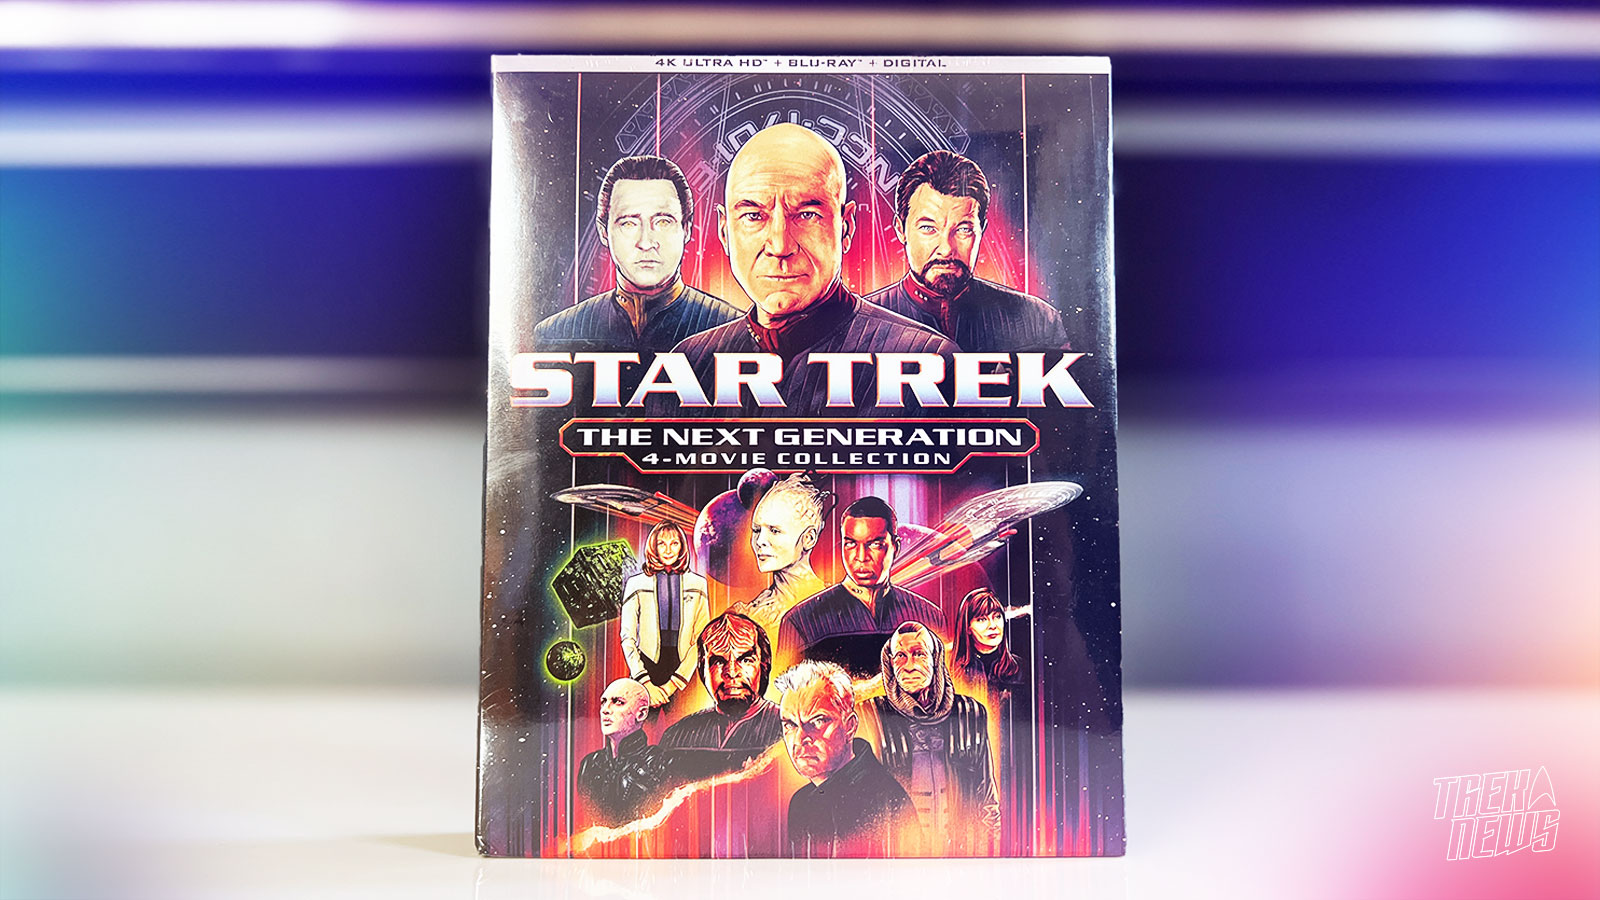 Star Trek: The Next Generation 4-Movie Collection 4K UHD Review: The TNG films have never looked so good